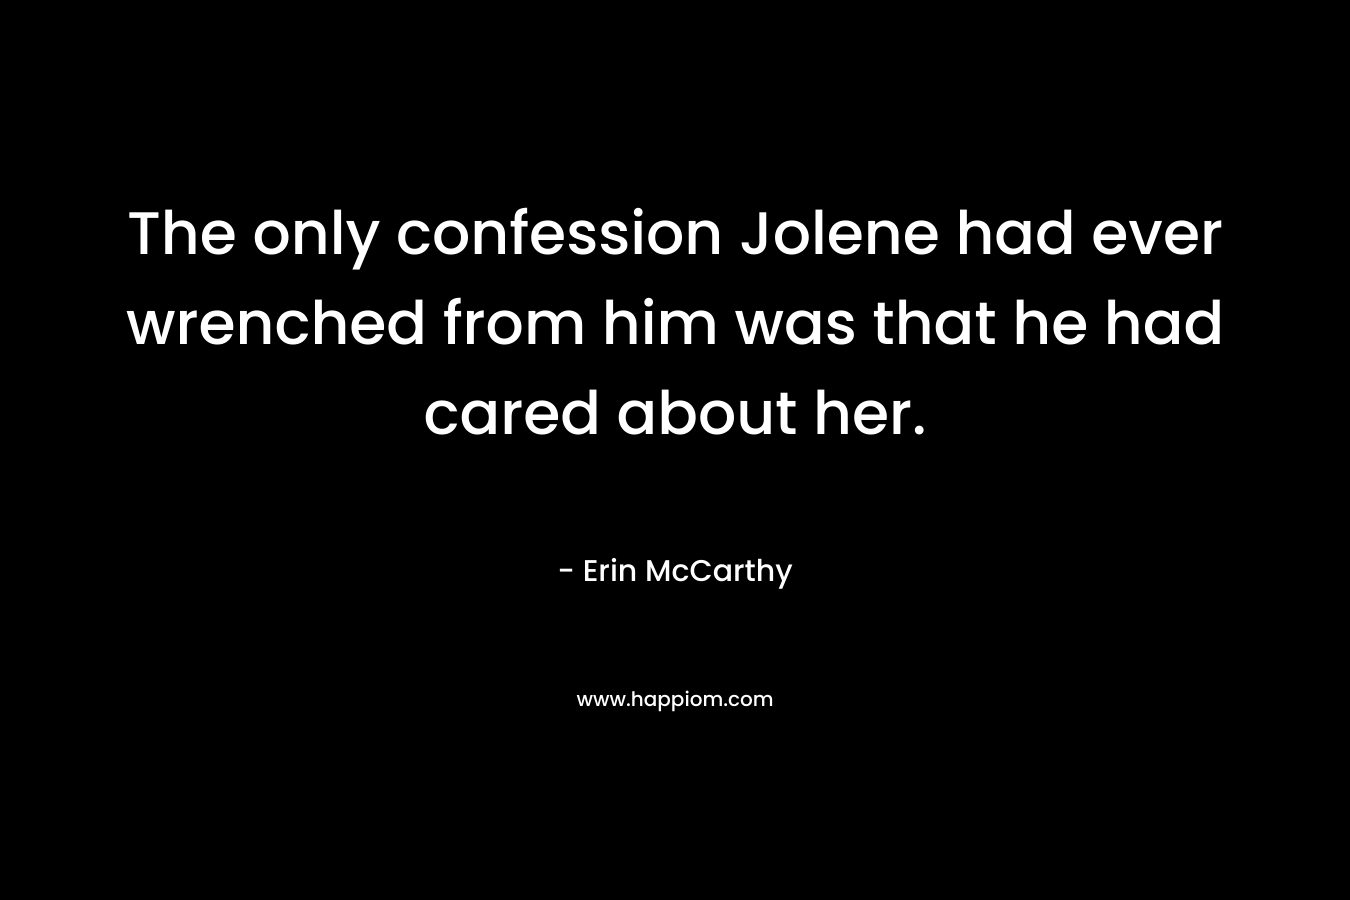 The only confession Jolene had ever wrenched from him was that he had cared about her.